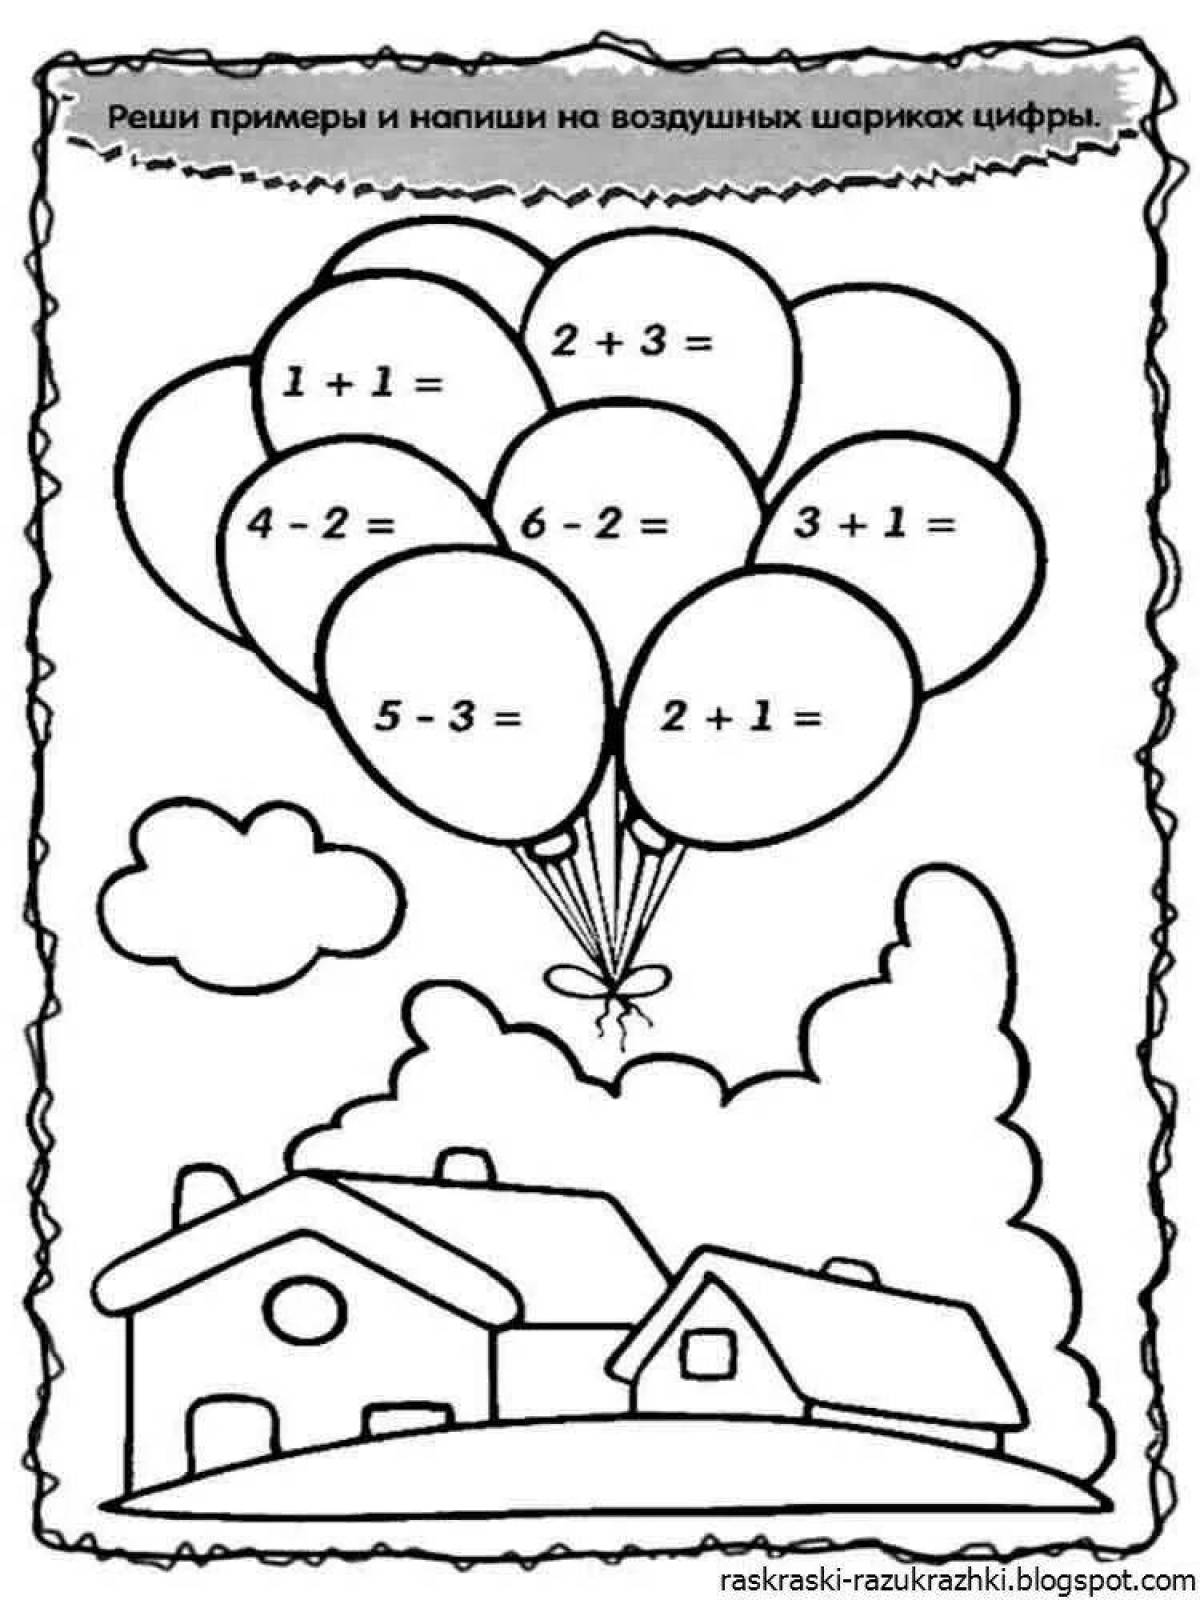 Fun math coloring book for kids 5-7 years old